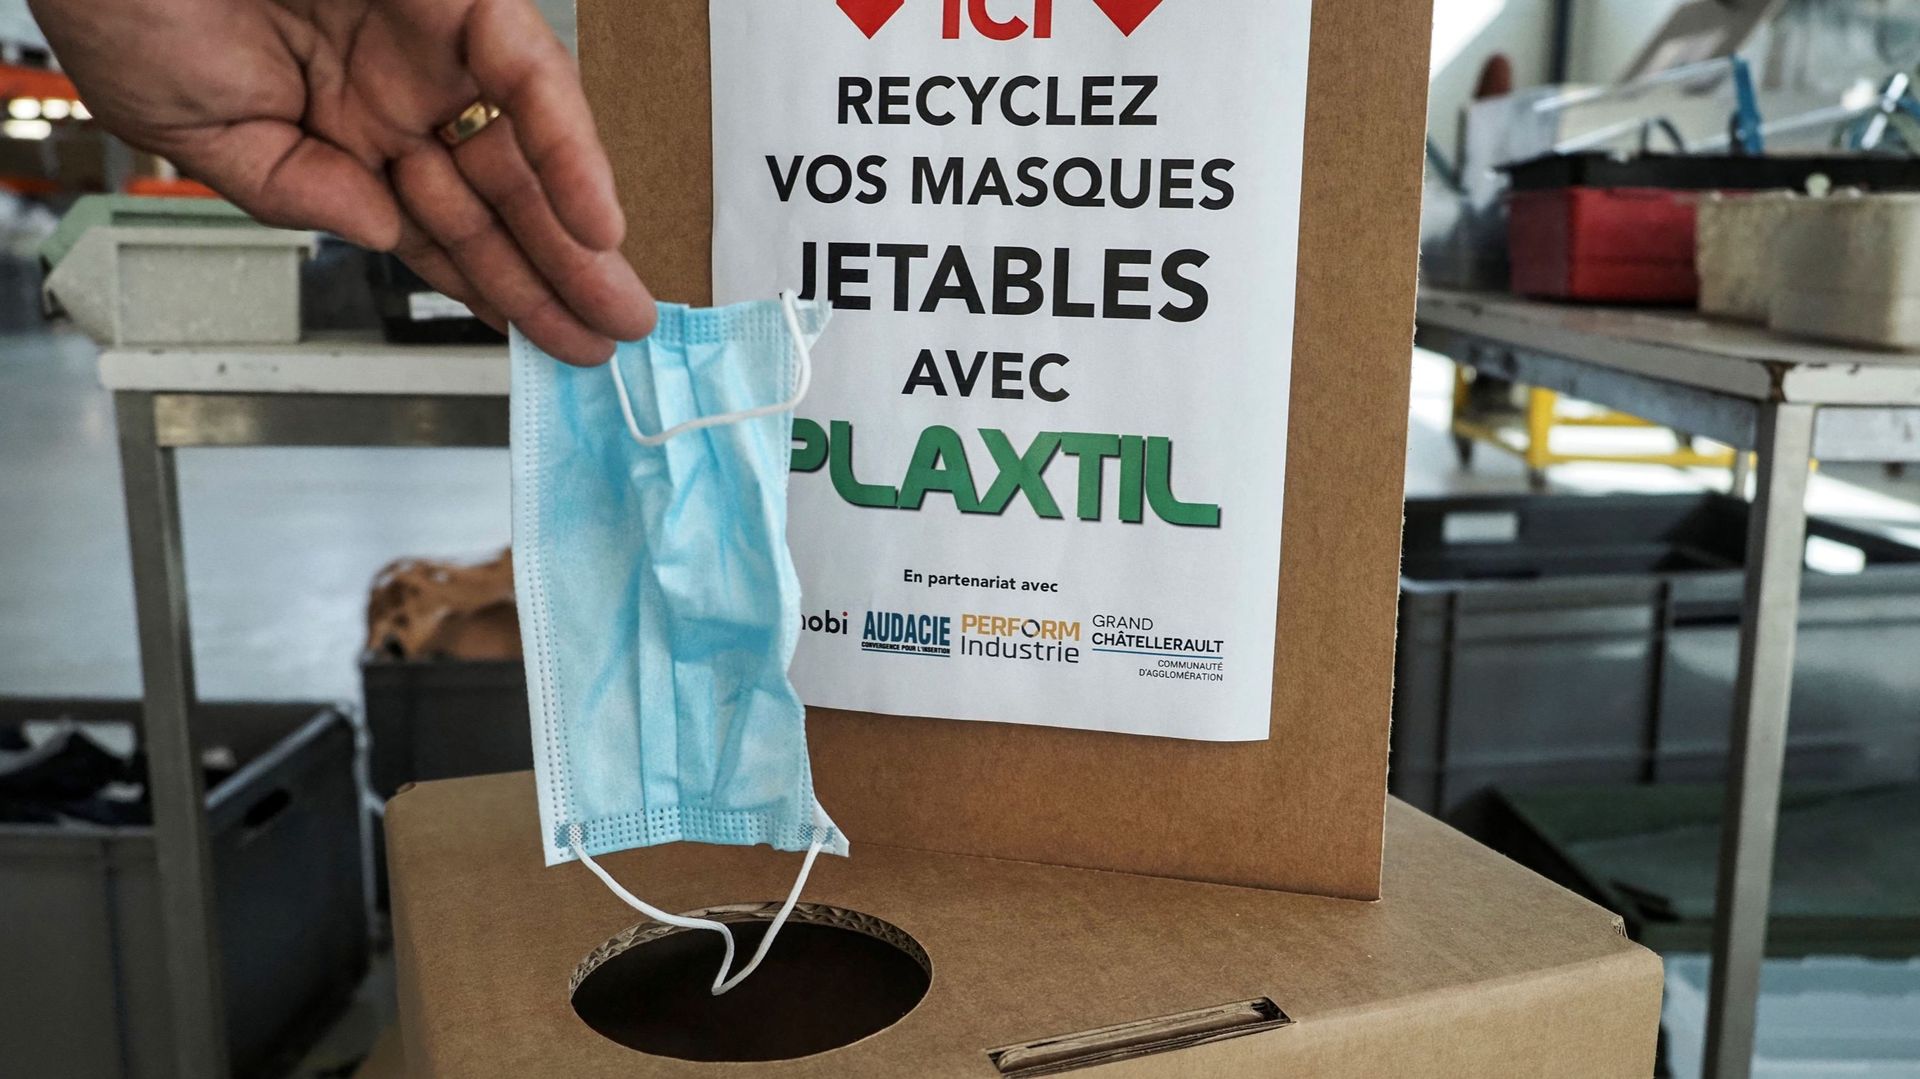 A Châtellerault, on recycle les masques jetables